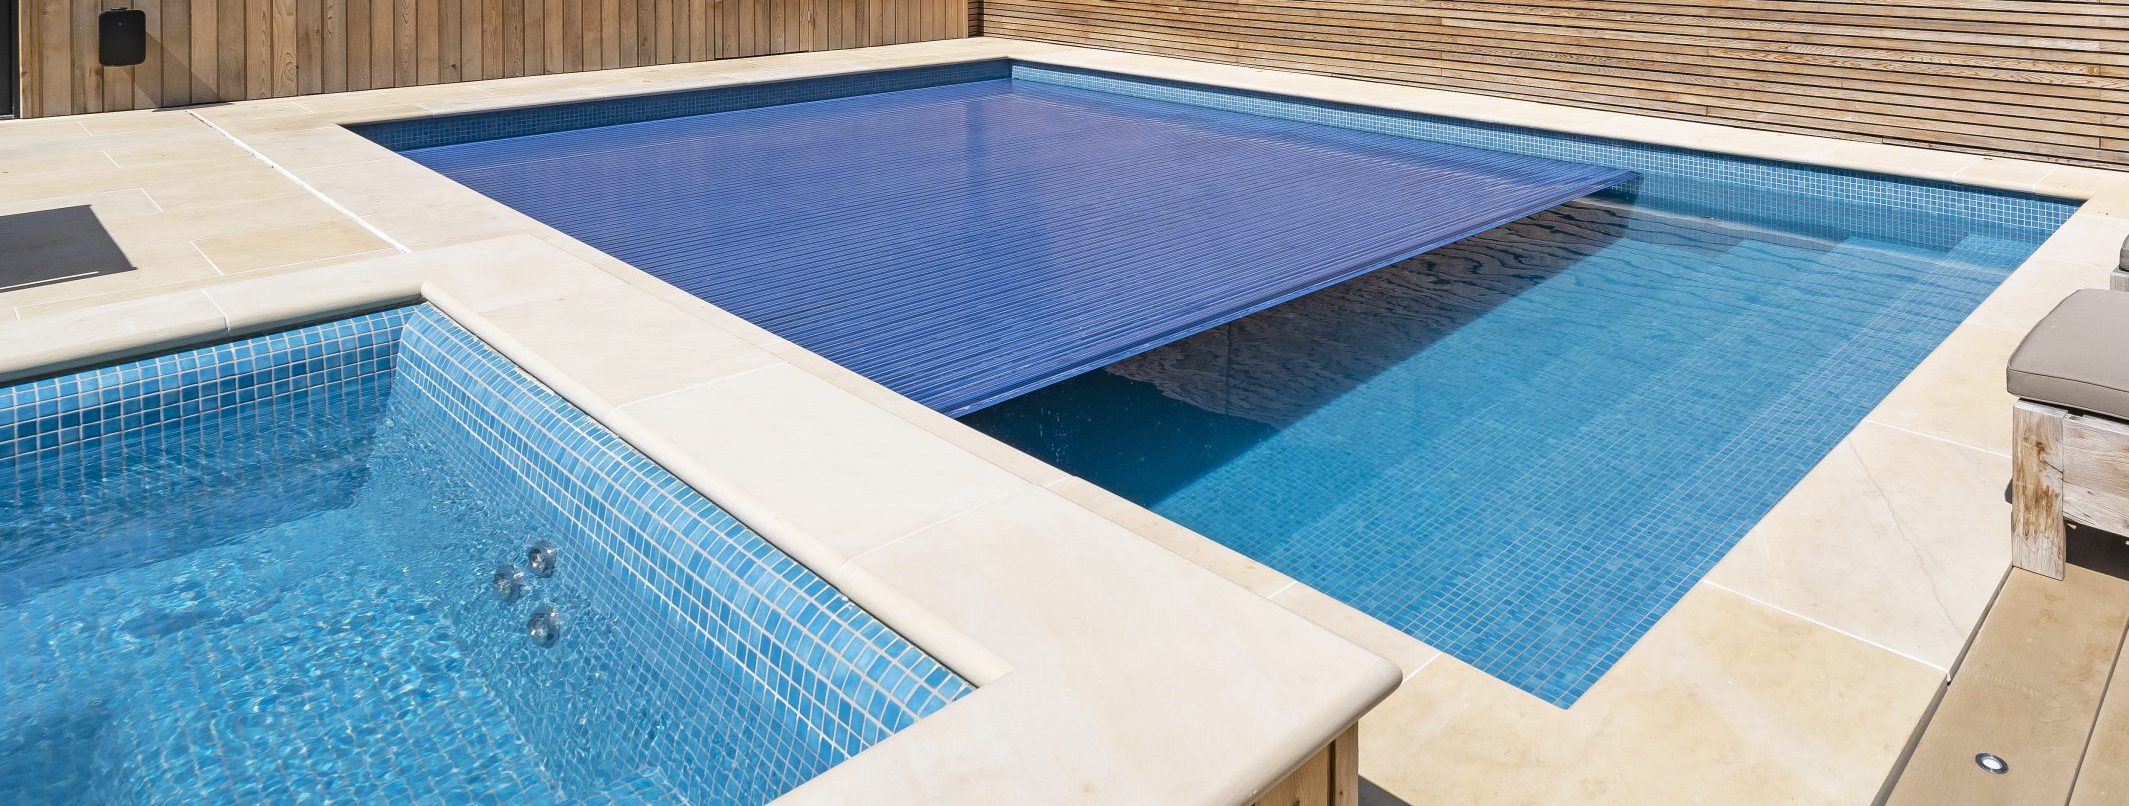 Luxury pool covers over a pool